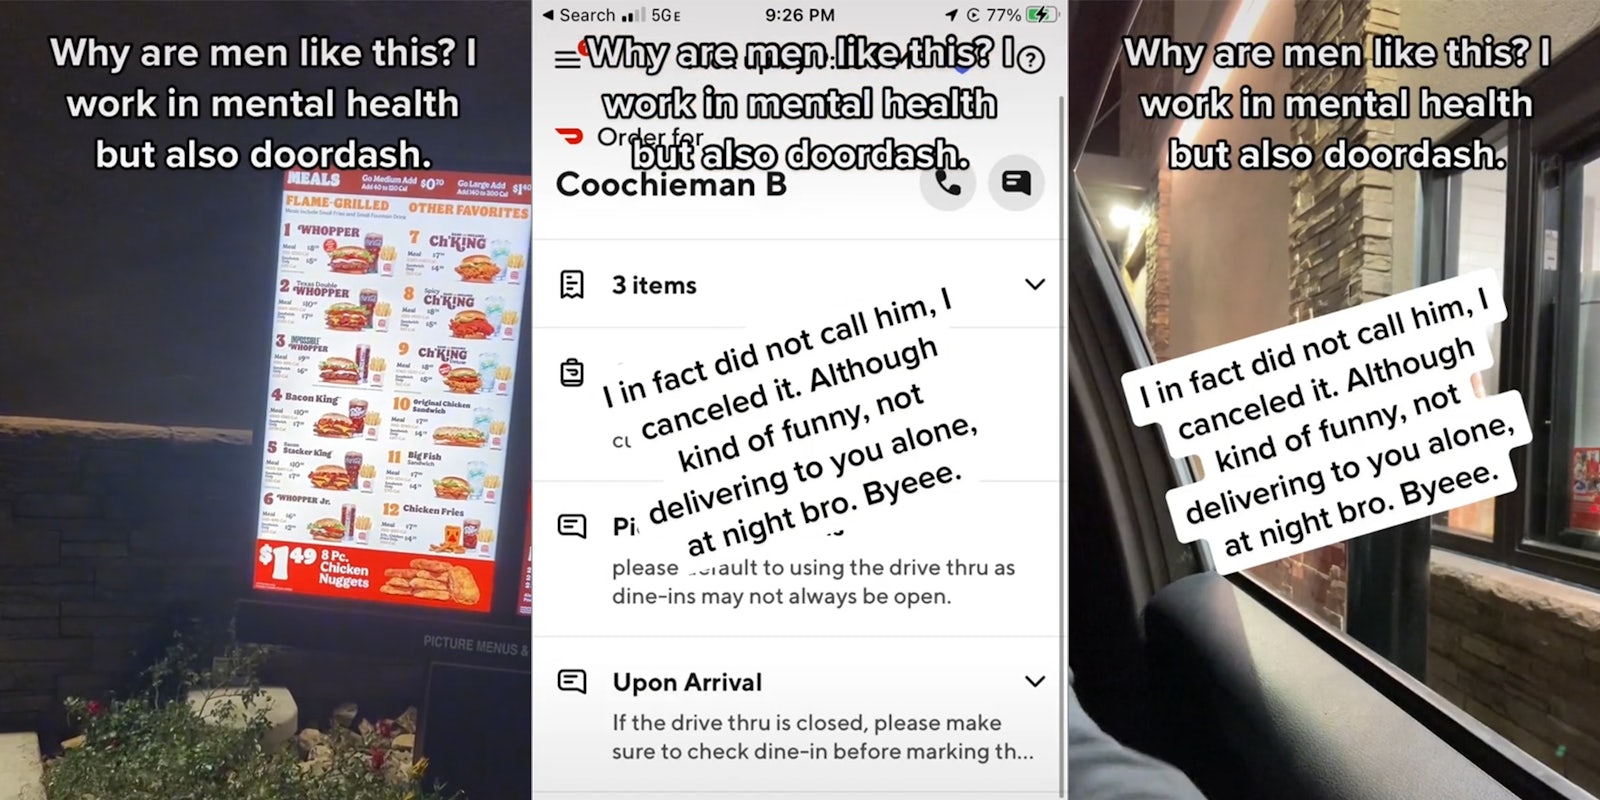 burger king drive thru (l) 'Coochieman B' doordash order page (c) drive thru window from car (r) all with caption 'why are men like this? i work in mental health but also doordash'